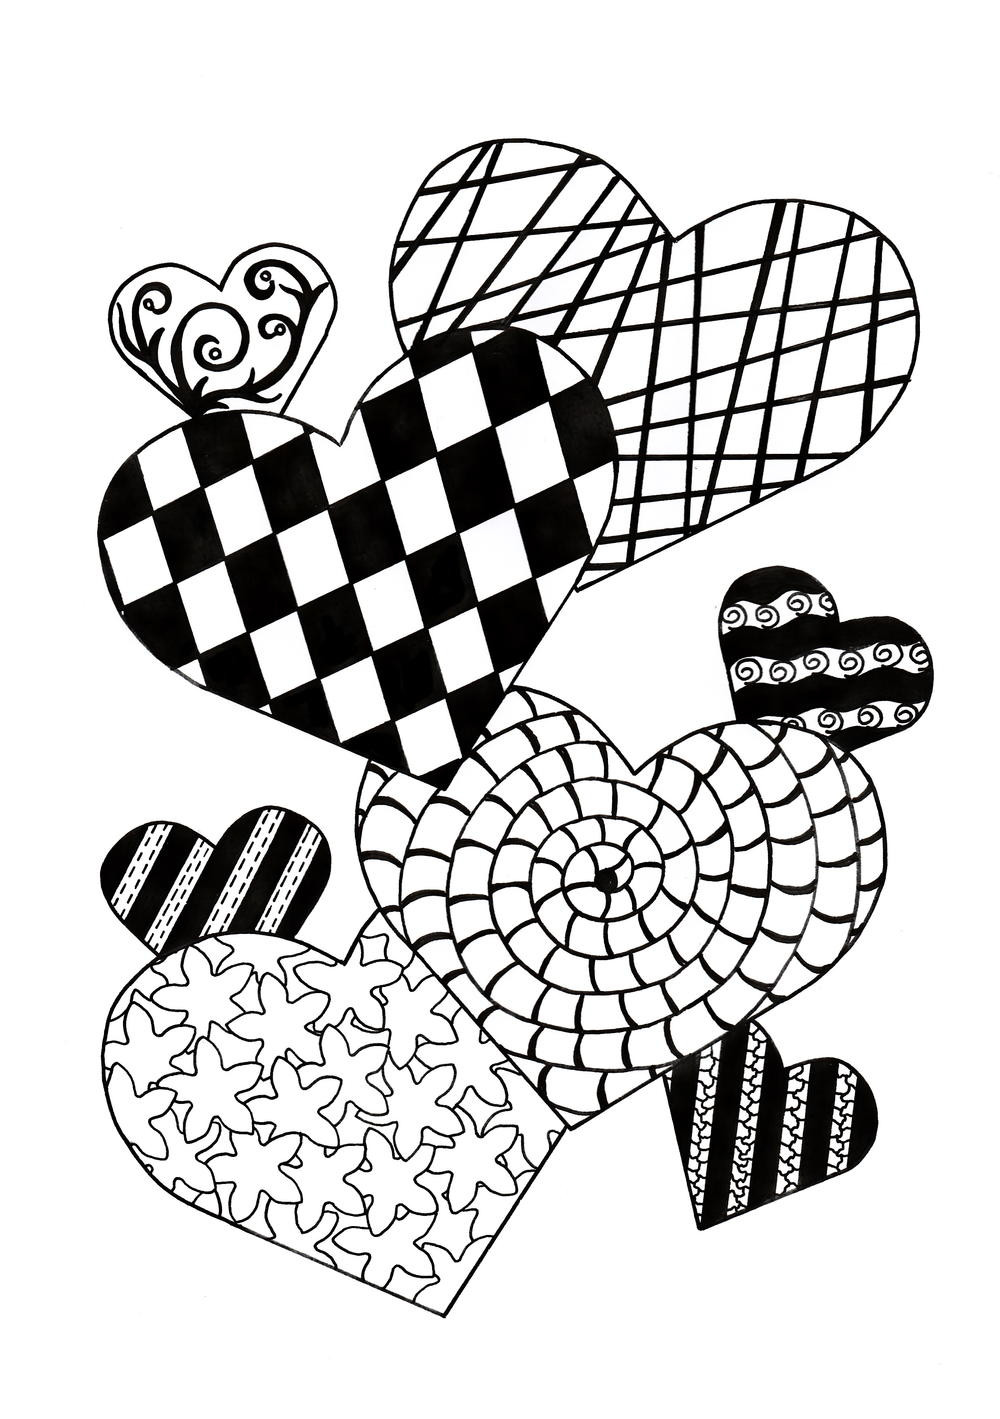 Adult Coloring Pages Hearts
 Zentangle Cupid of Hearts Adult Coloring Page